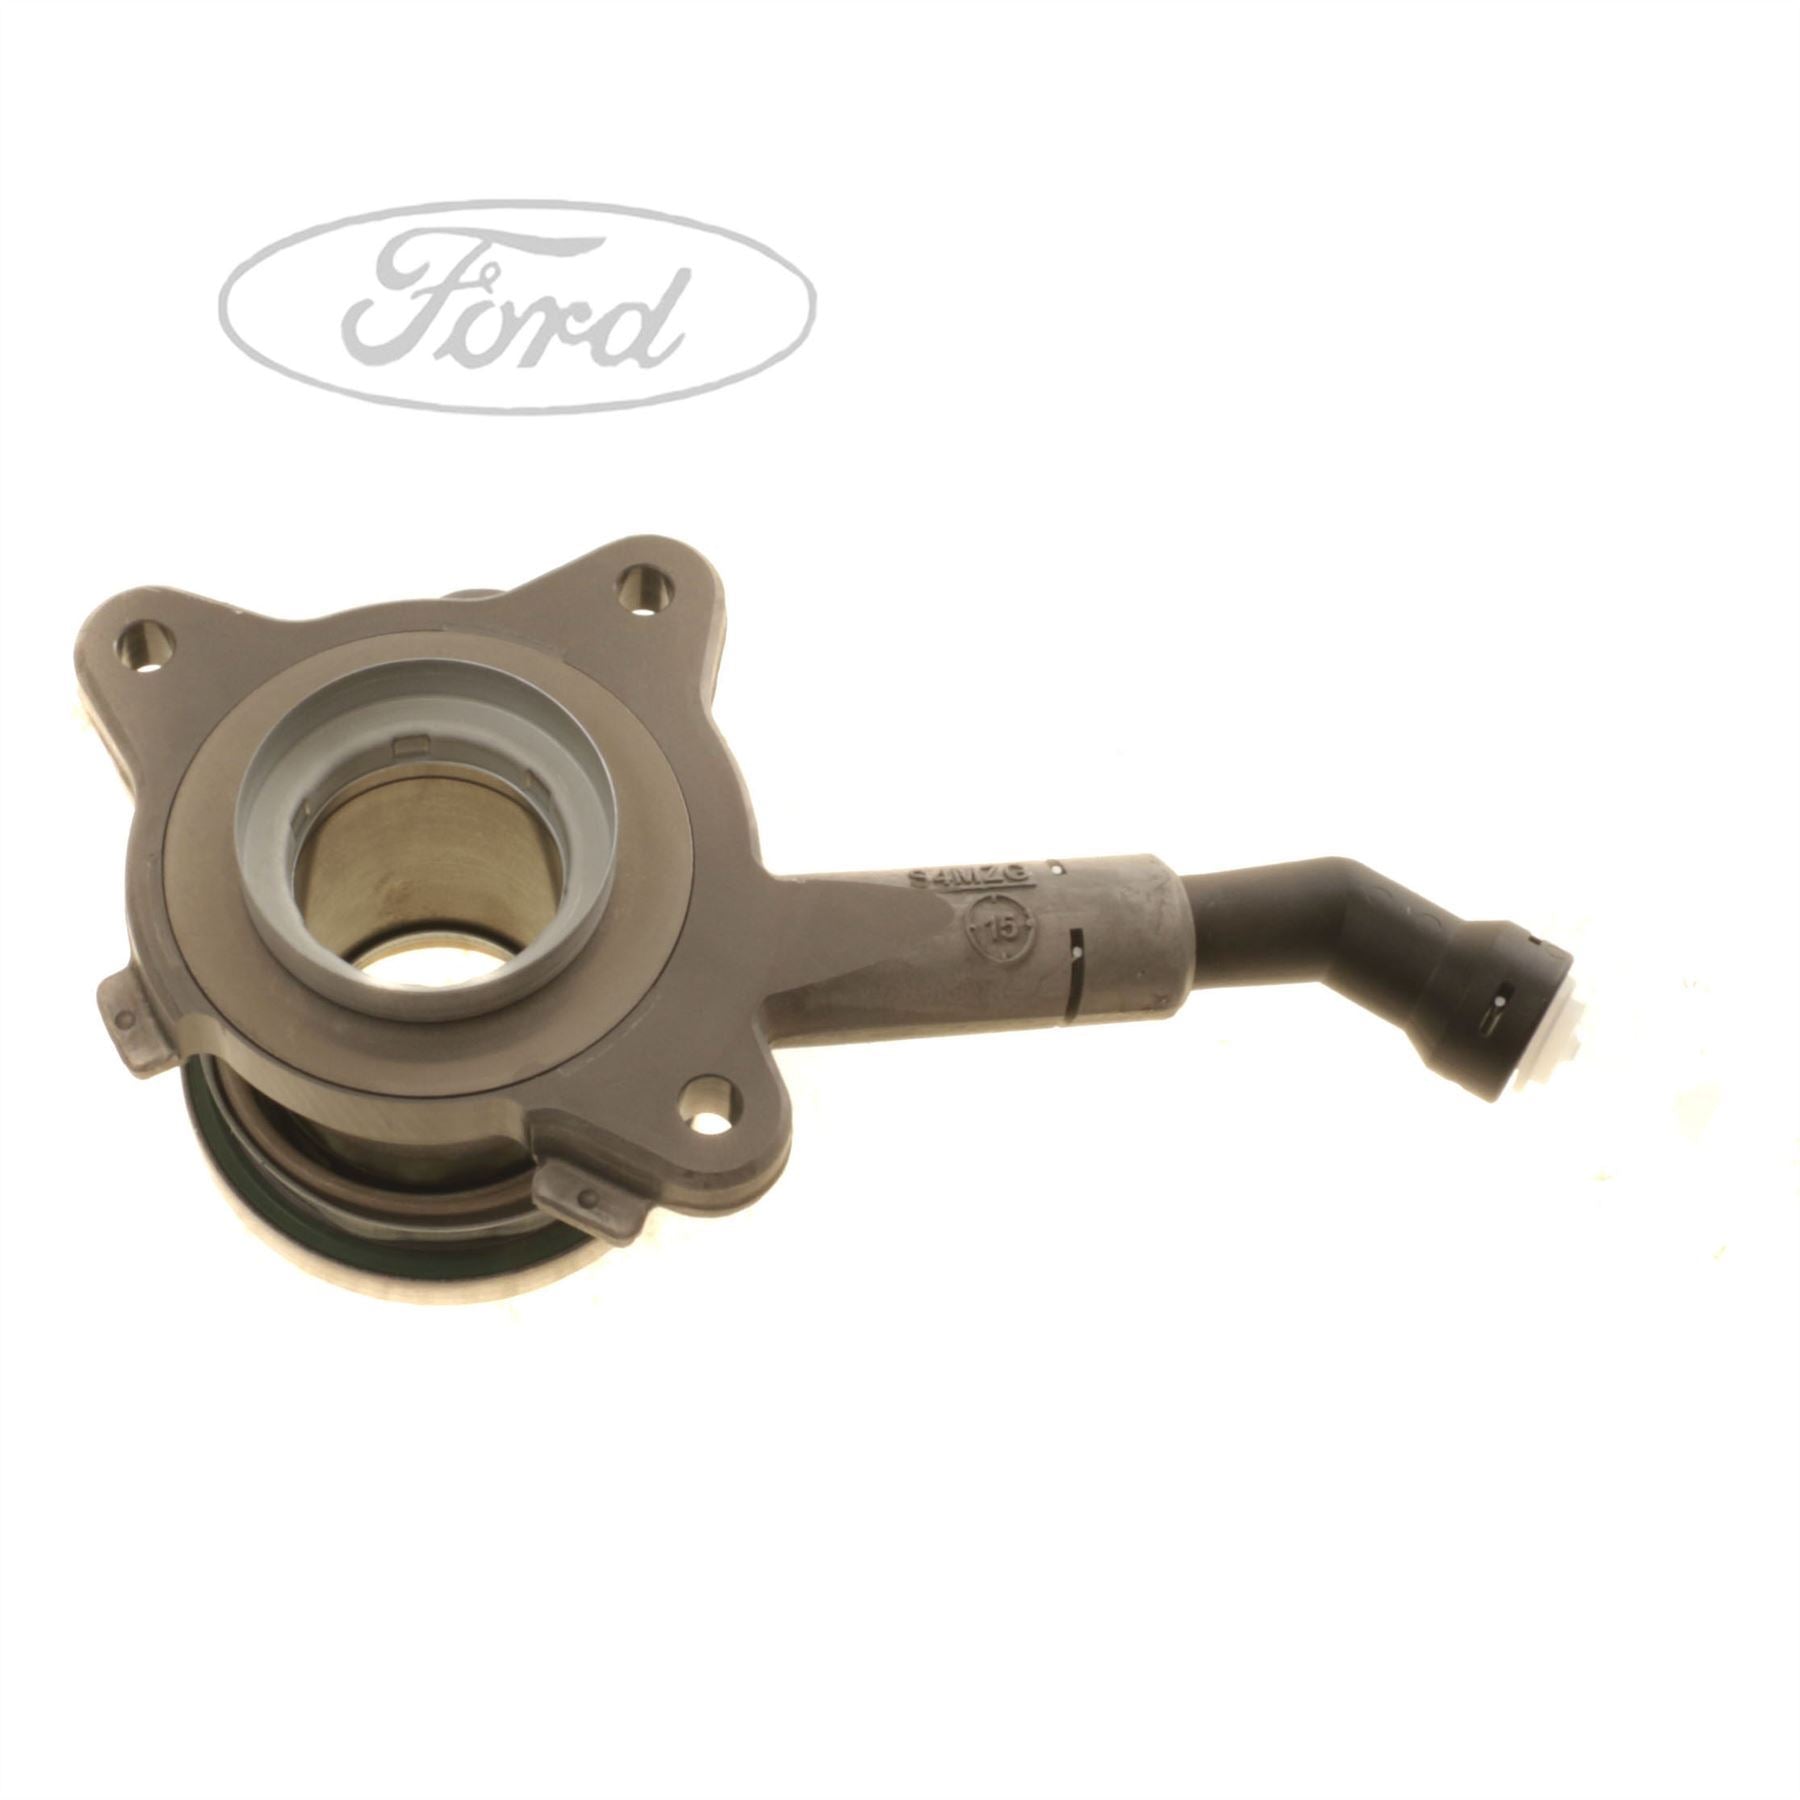 Clutch pick-up cylinder for Ford Transit custom bus box 1741668